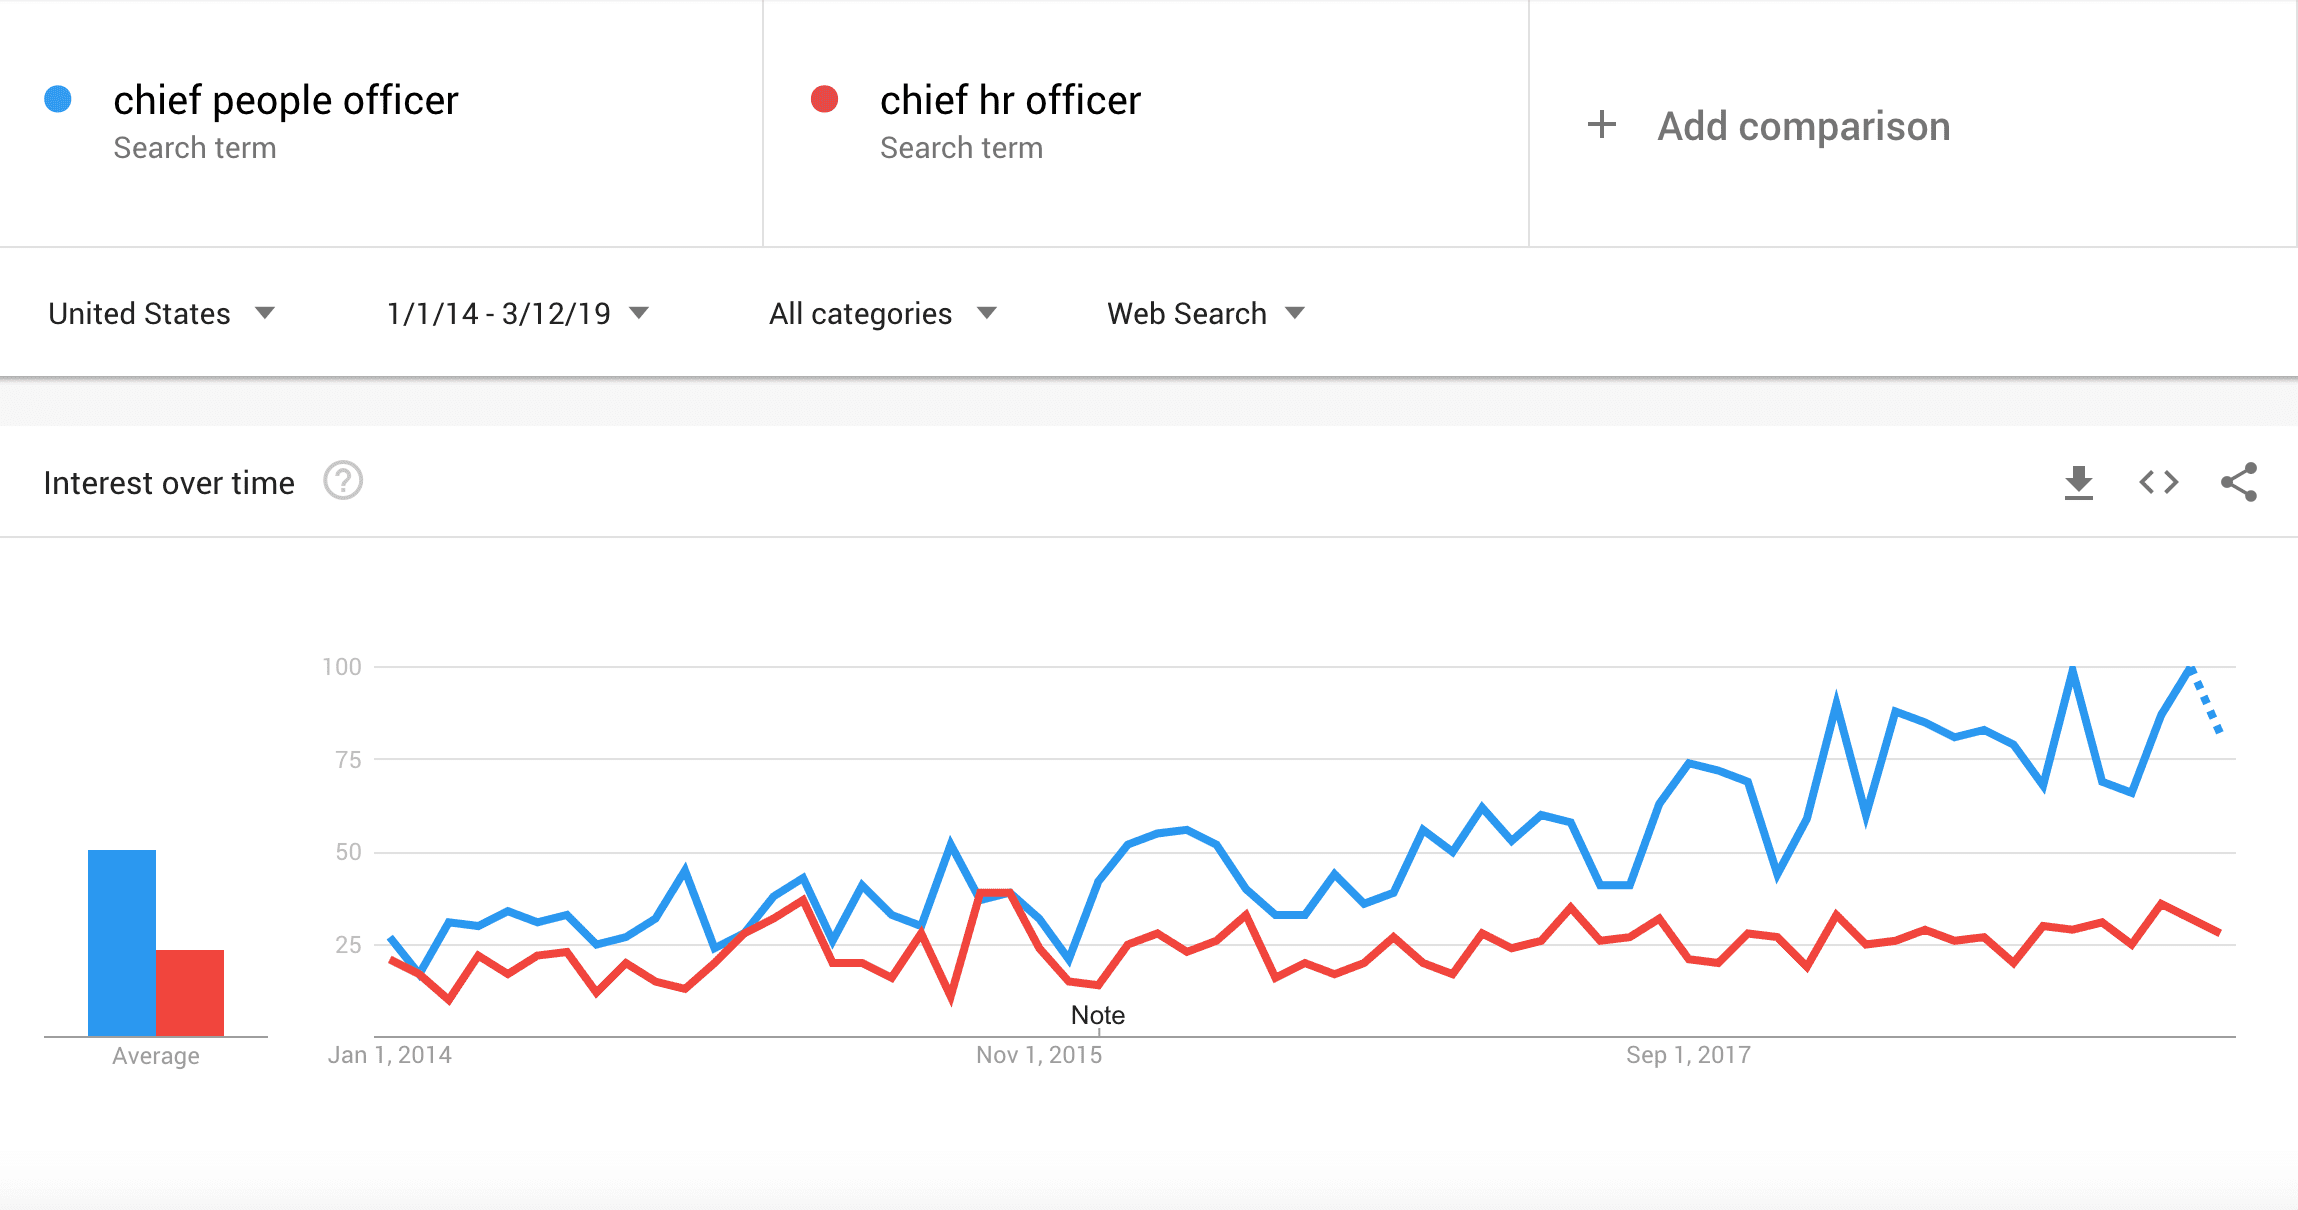 chief-people-officer-trending